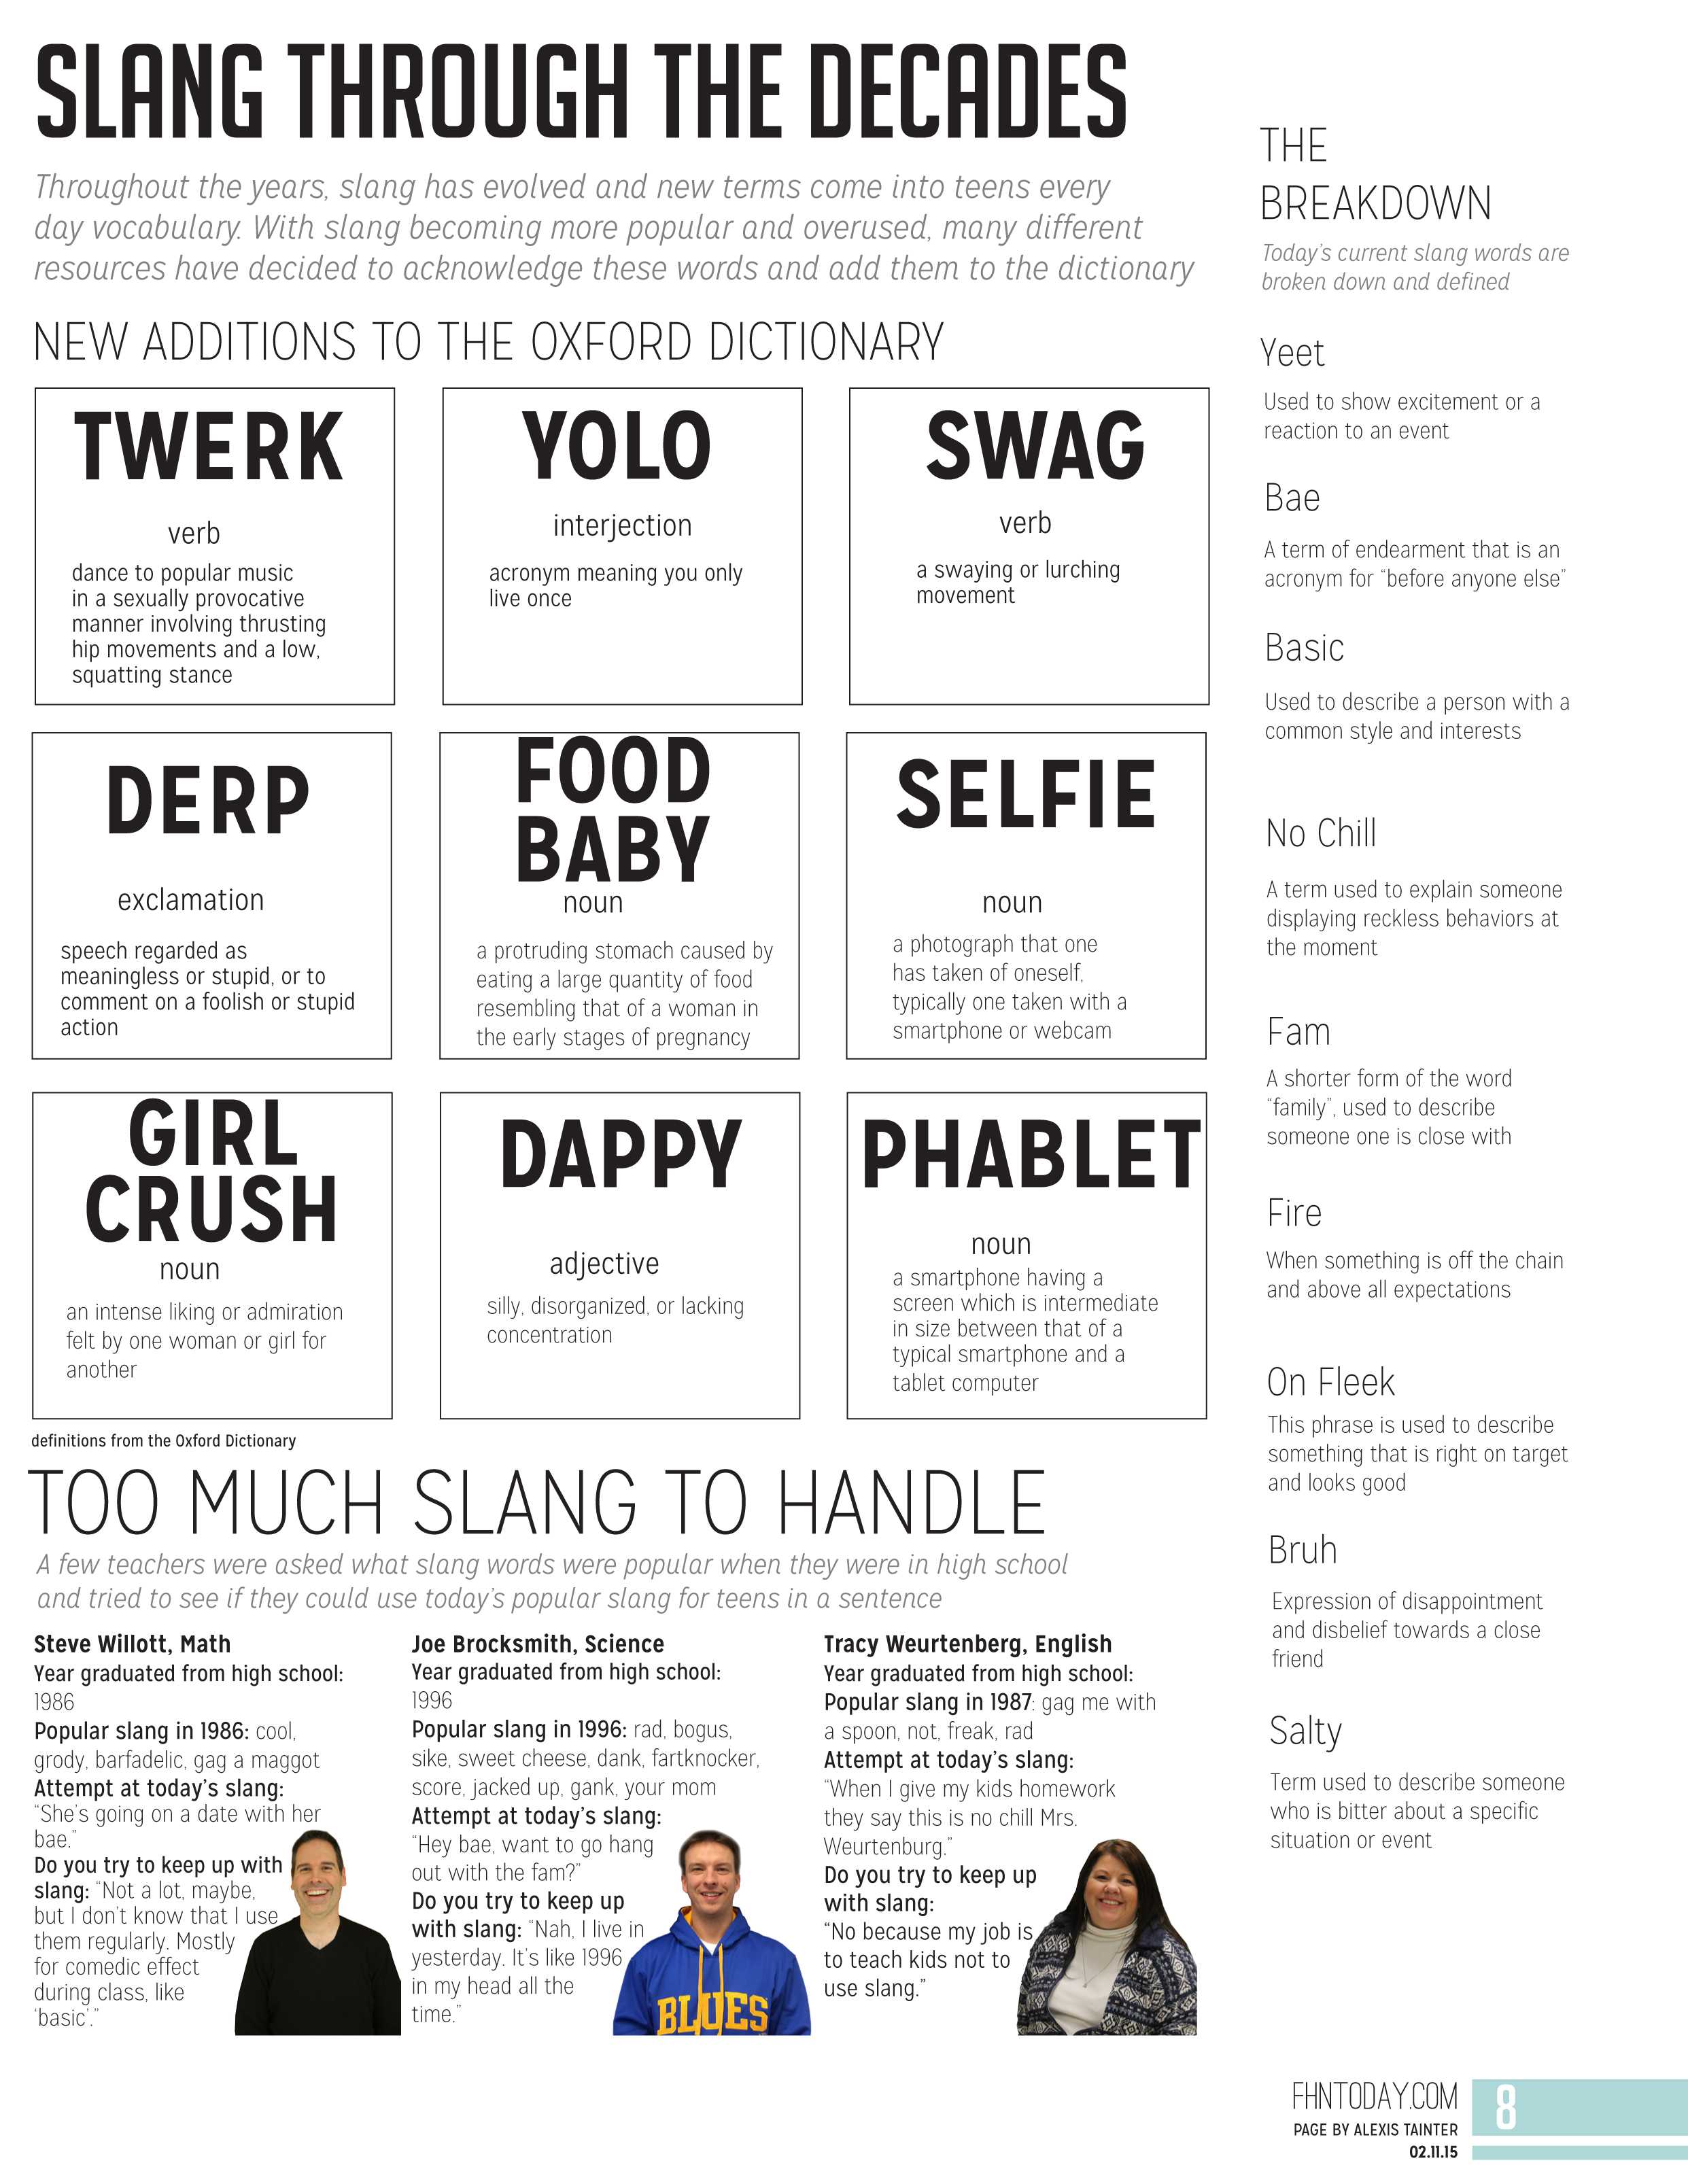 55 Teen Slang Words: A Dictionary for Parents